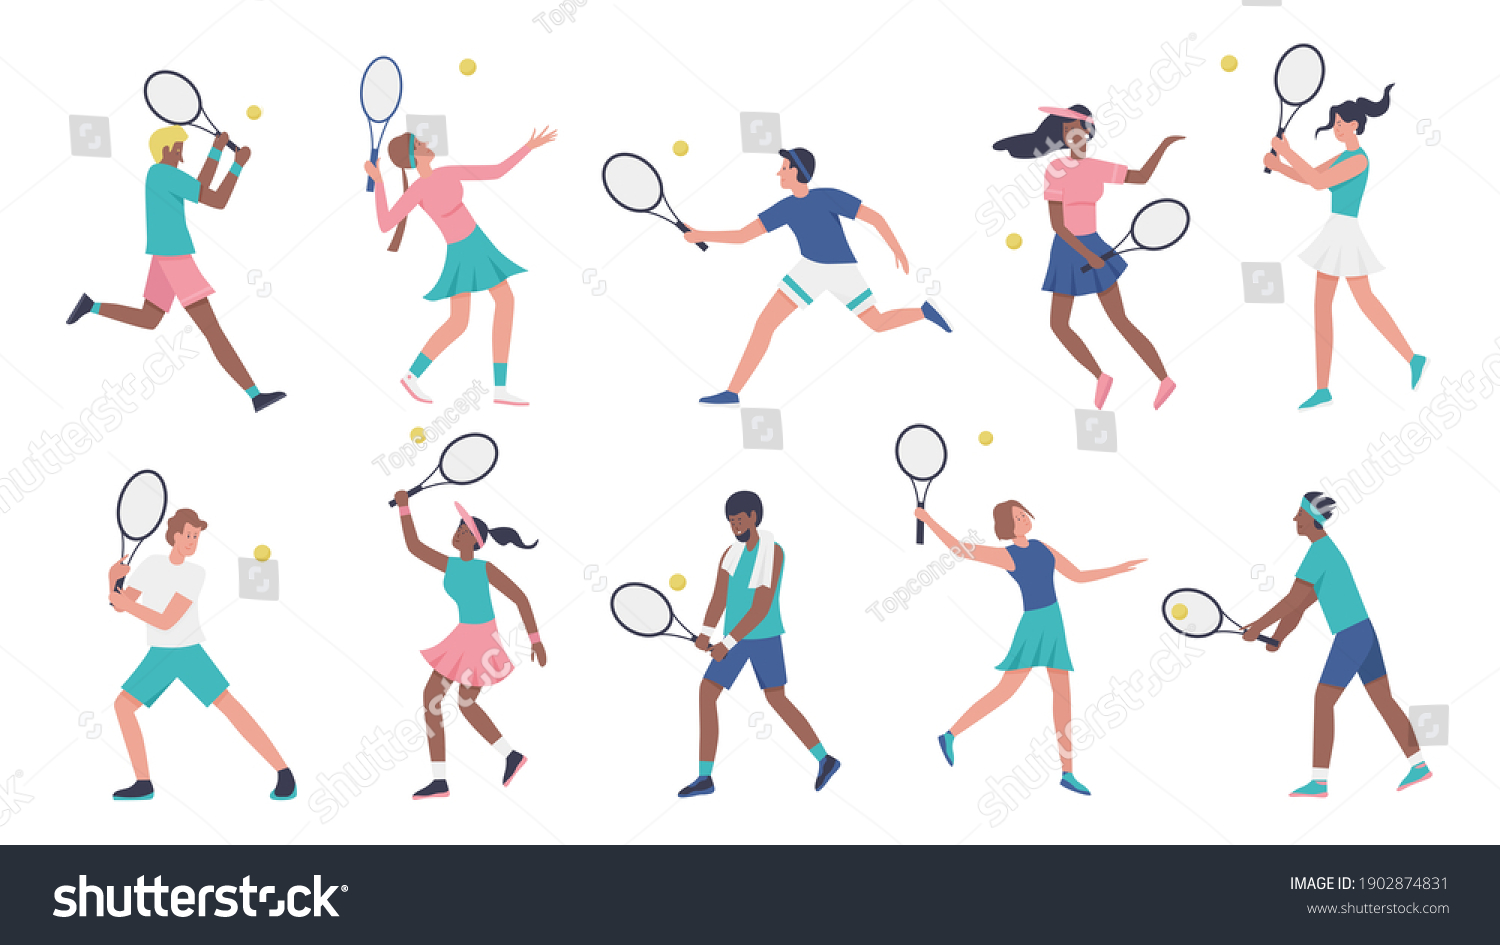 Workout playing tennis vector illustration set. Cartoon young woman man sportive characters in sportsman uniform play tennis, players holding rackets and hitting ball collection isolated on white #1902874831